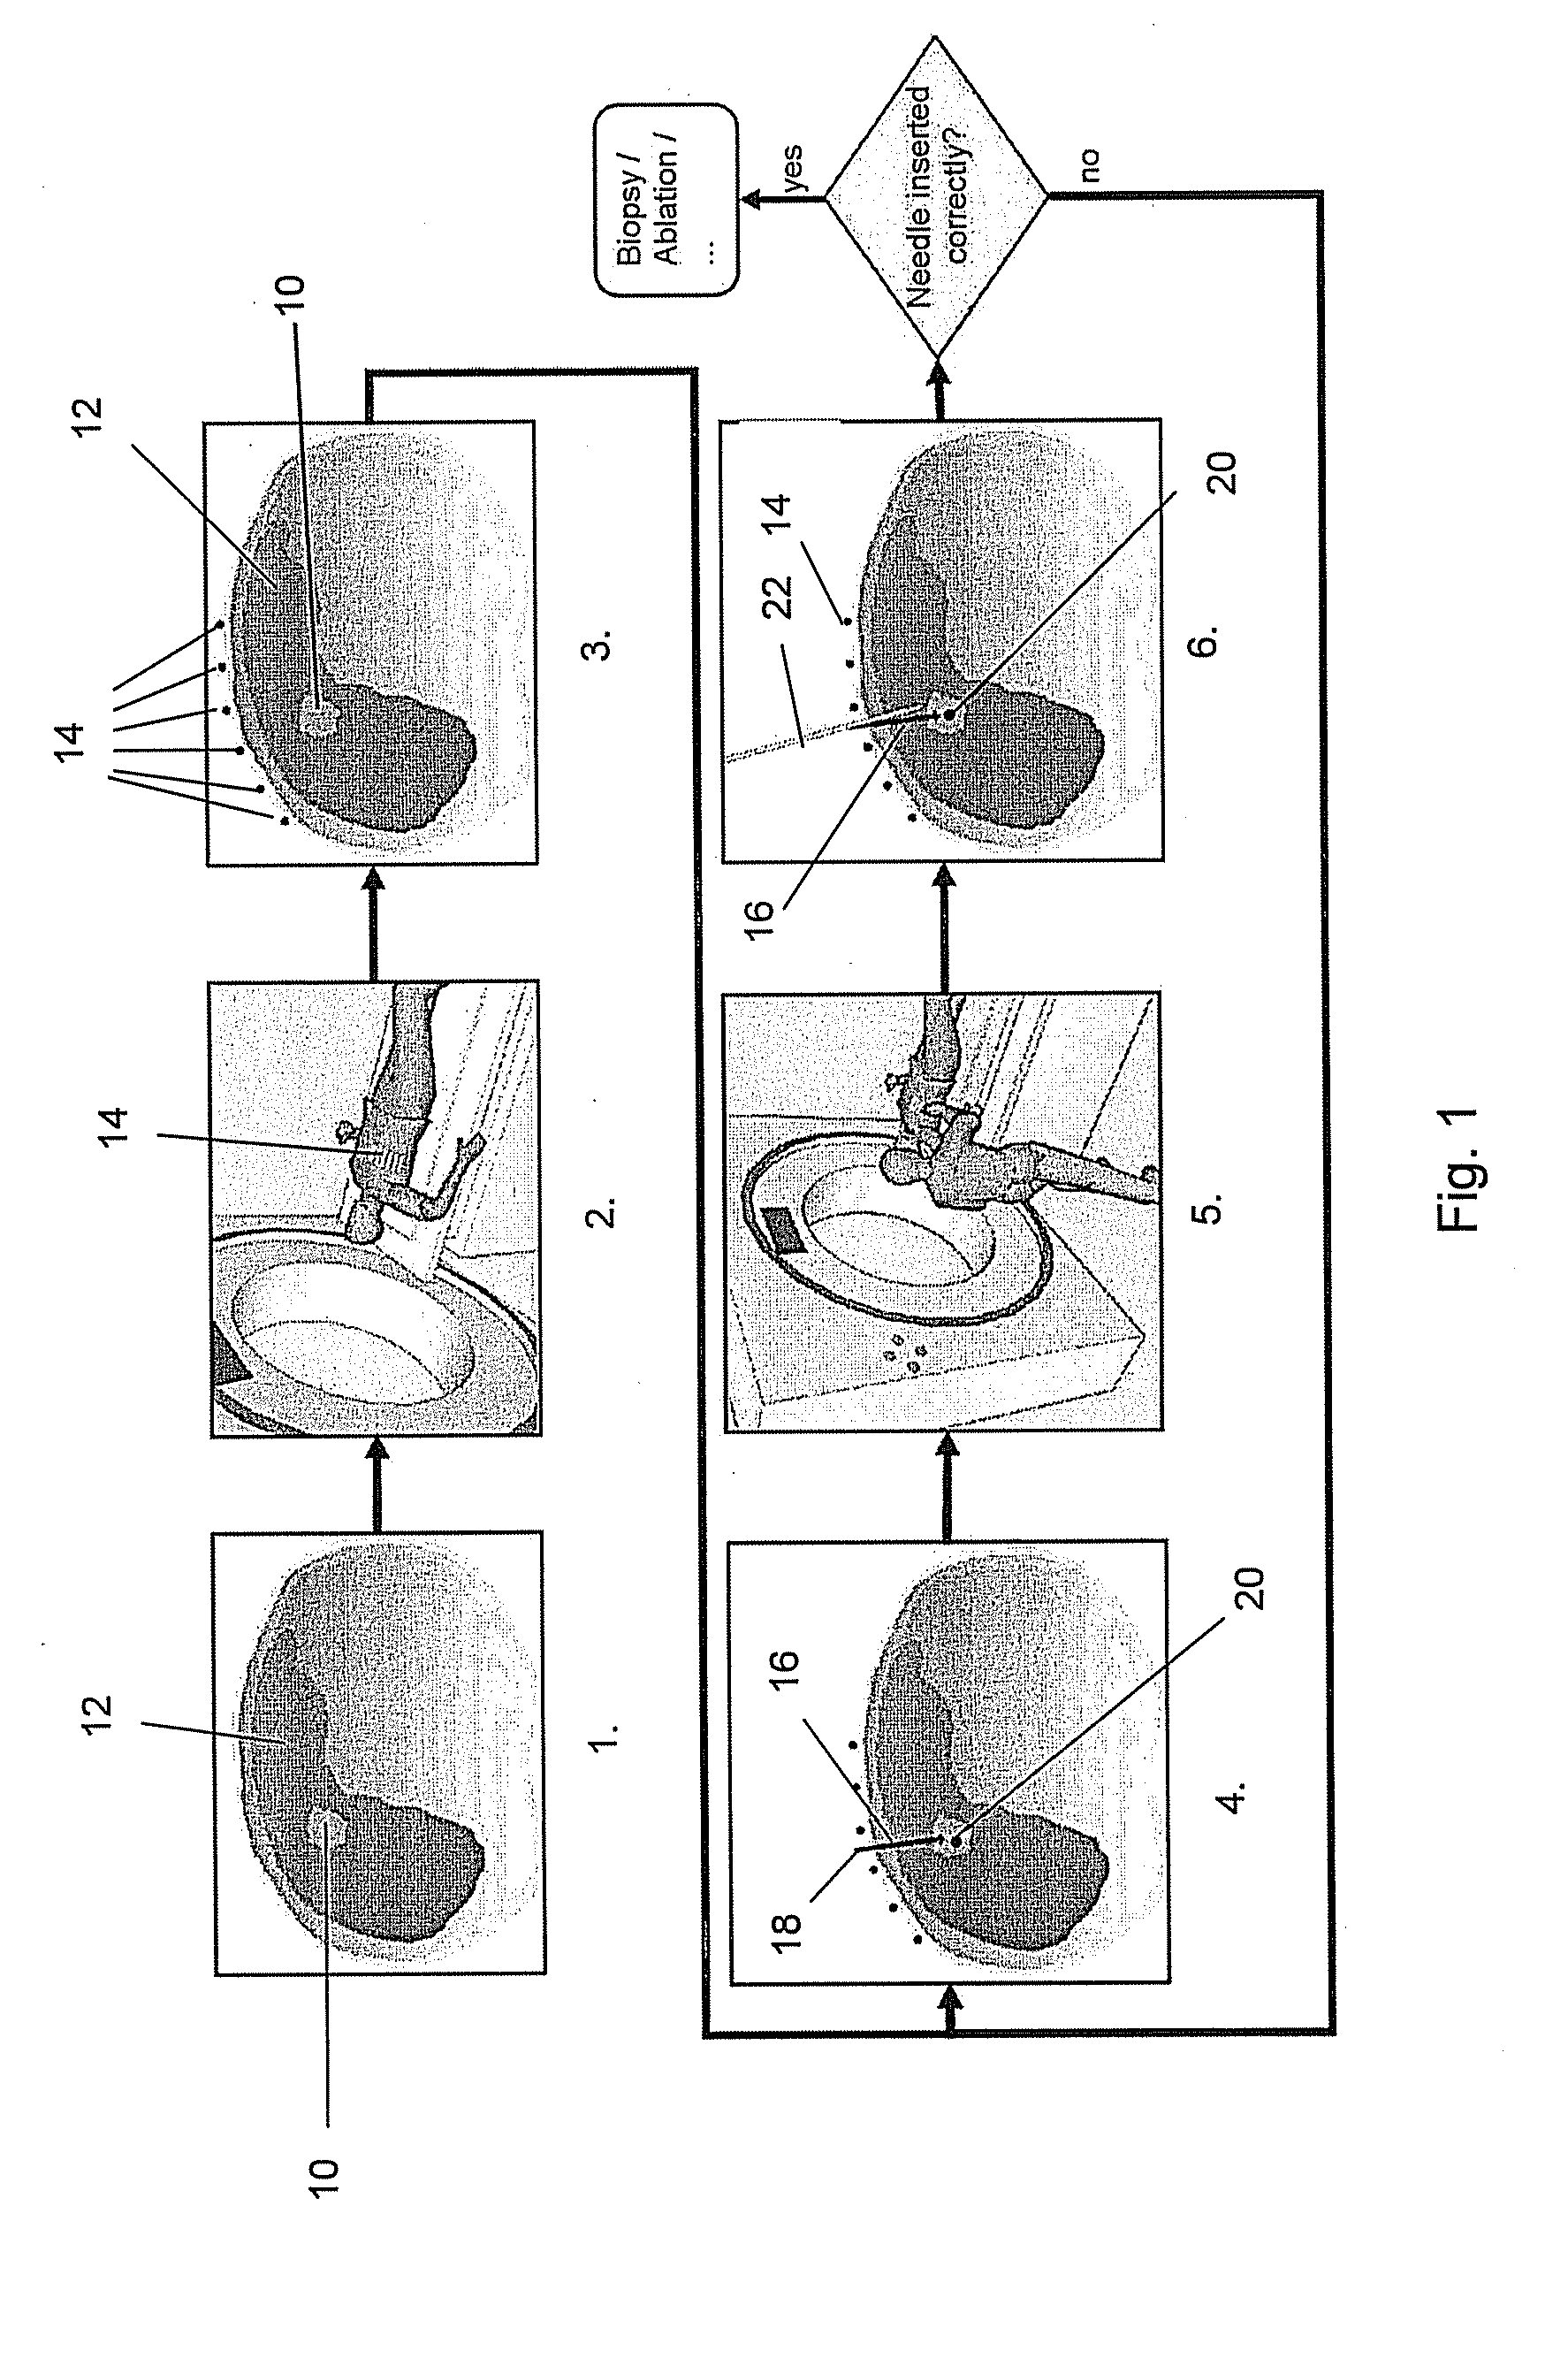 Method, system and computer program product for targeting of a target with an elongate instrument